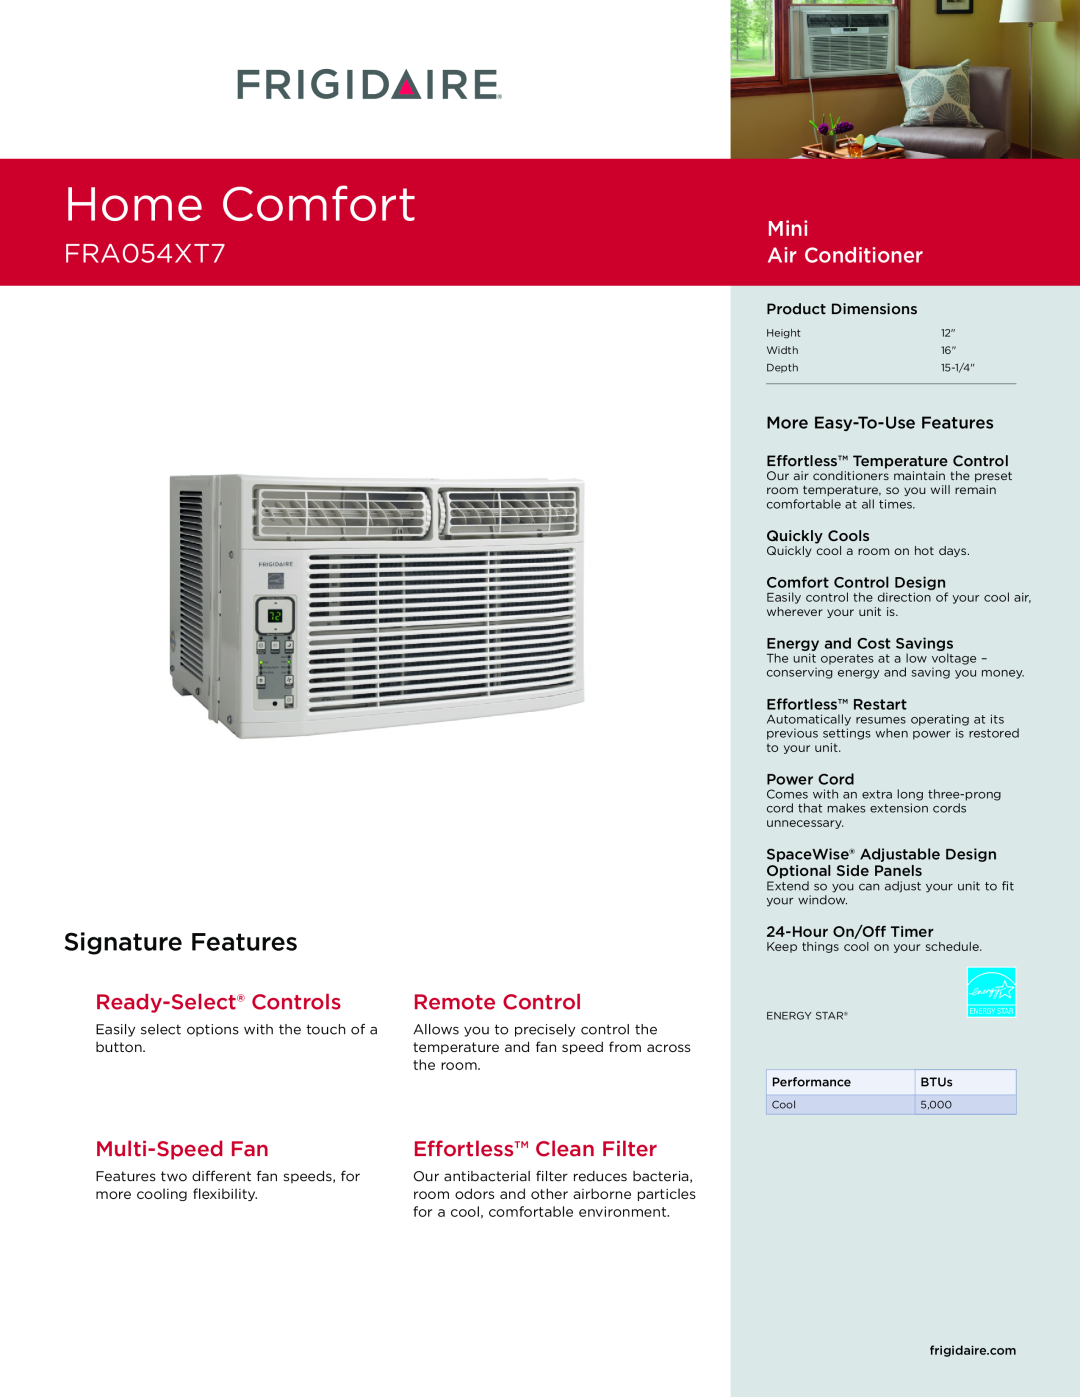 Frigidaire FRA054XT7 dimensions Home Comfort, Signature Features, Mini Air Conditioner , Ready-Select Controls 